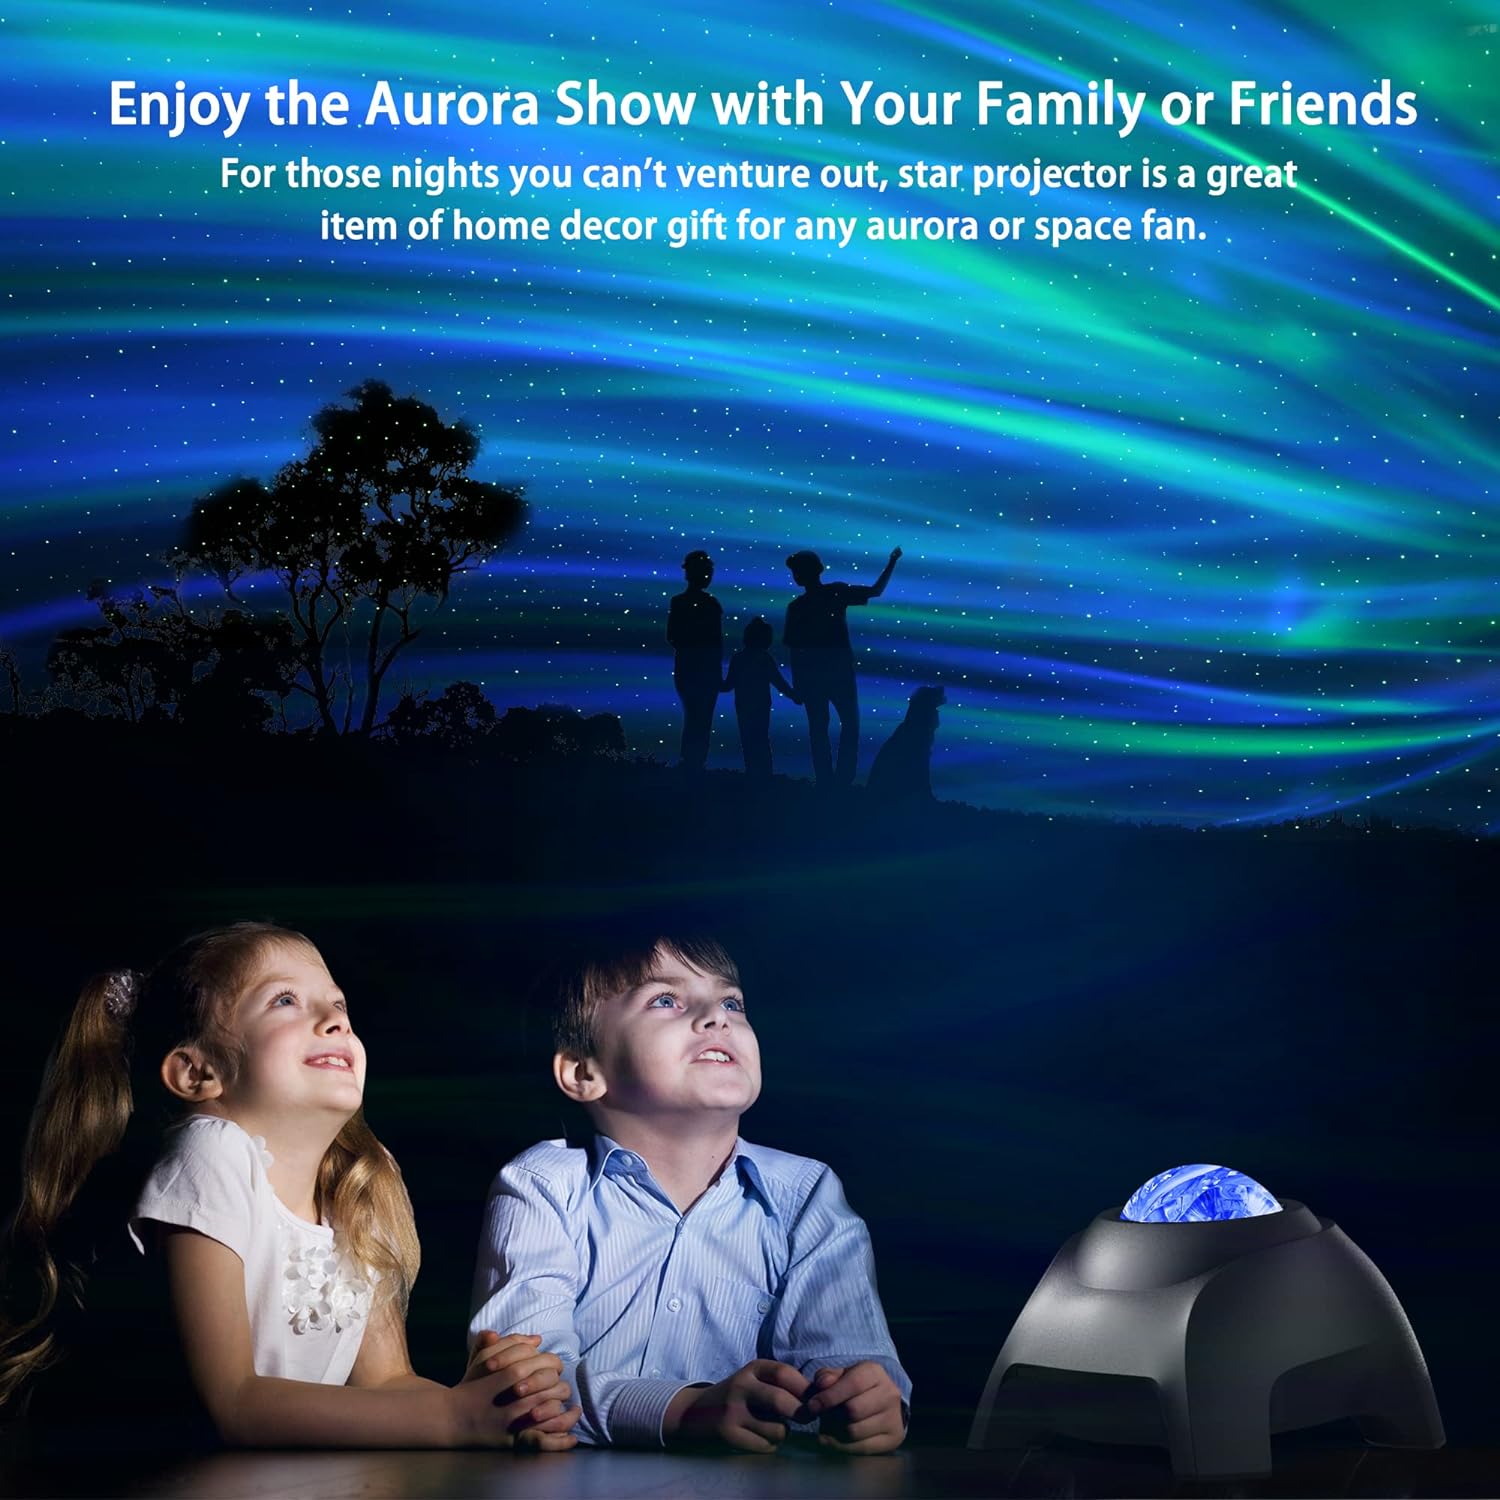 Northern Lights Aurora Projector, Night Light Galaxy Projector for Kids Adults, for Home Decor Bedroom/Ceiling/Party